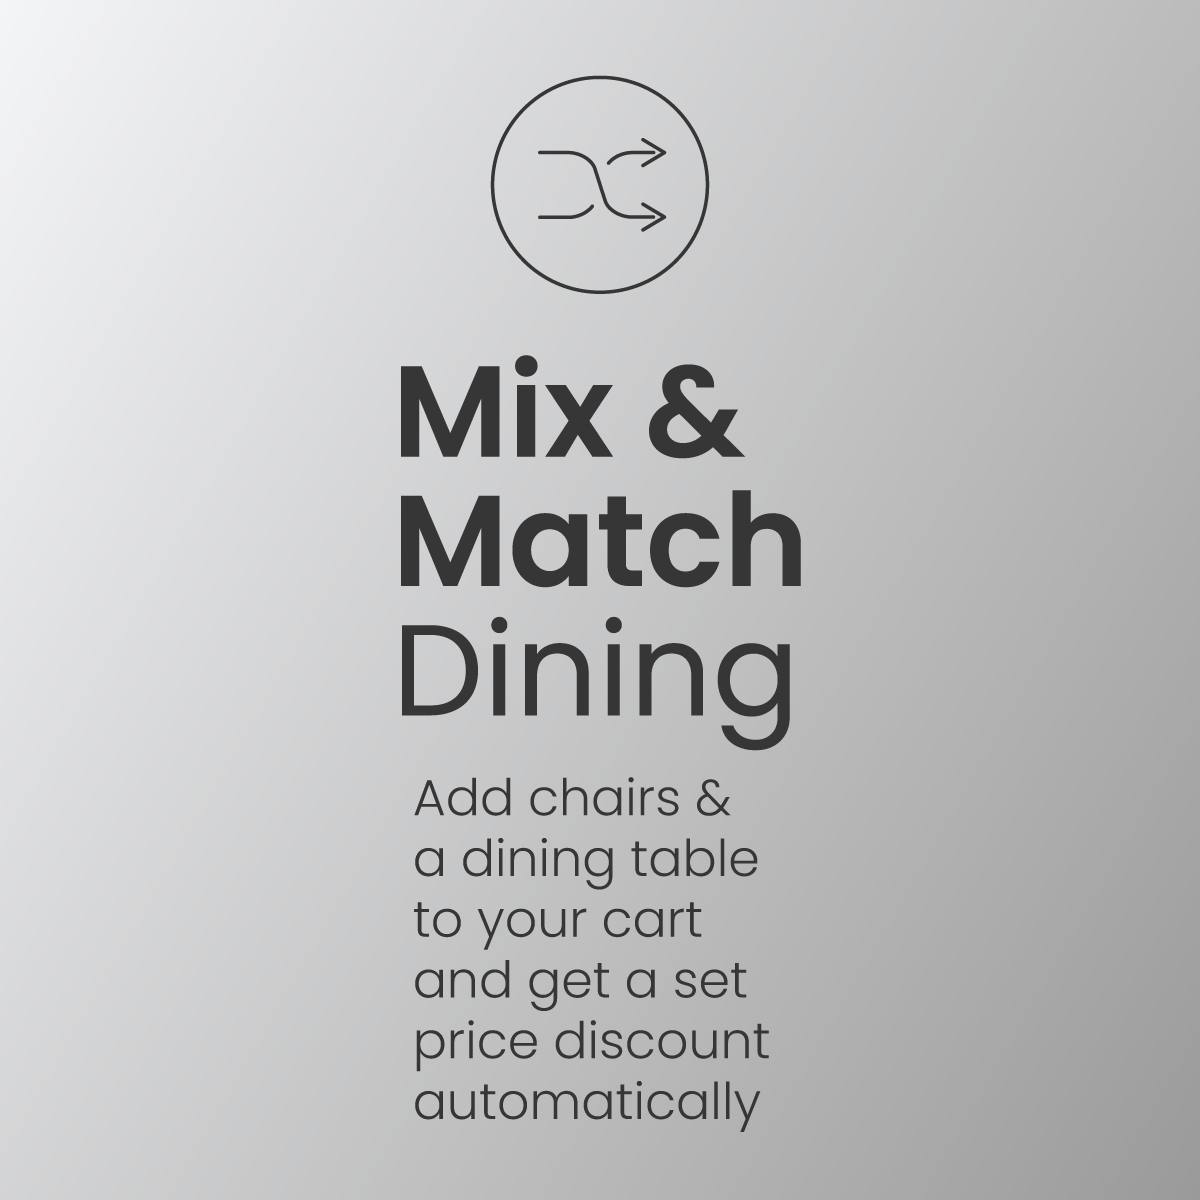 Get a set price discount with our Mix & Match dining